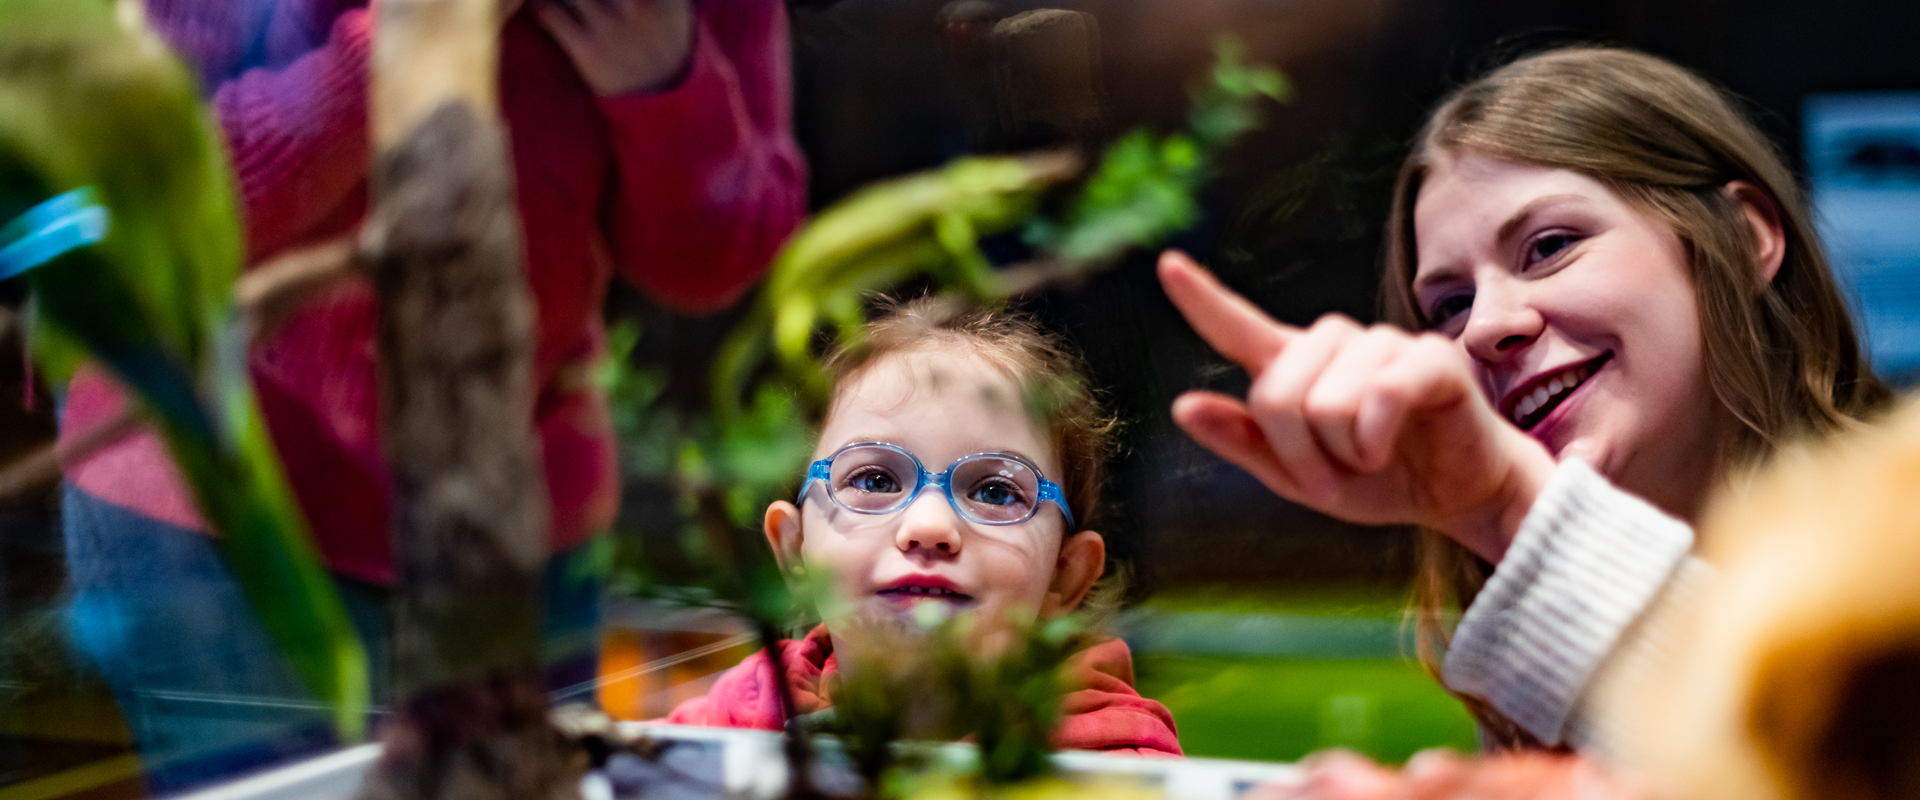 A child looks as a woman points at something out of focus in a glass case.